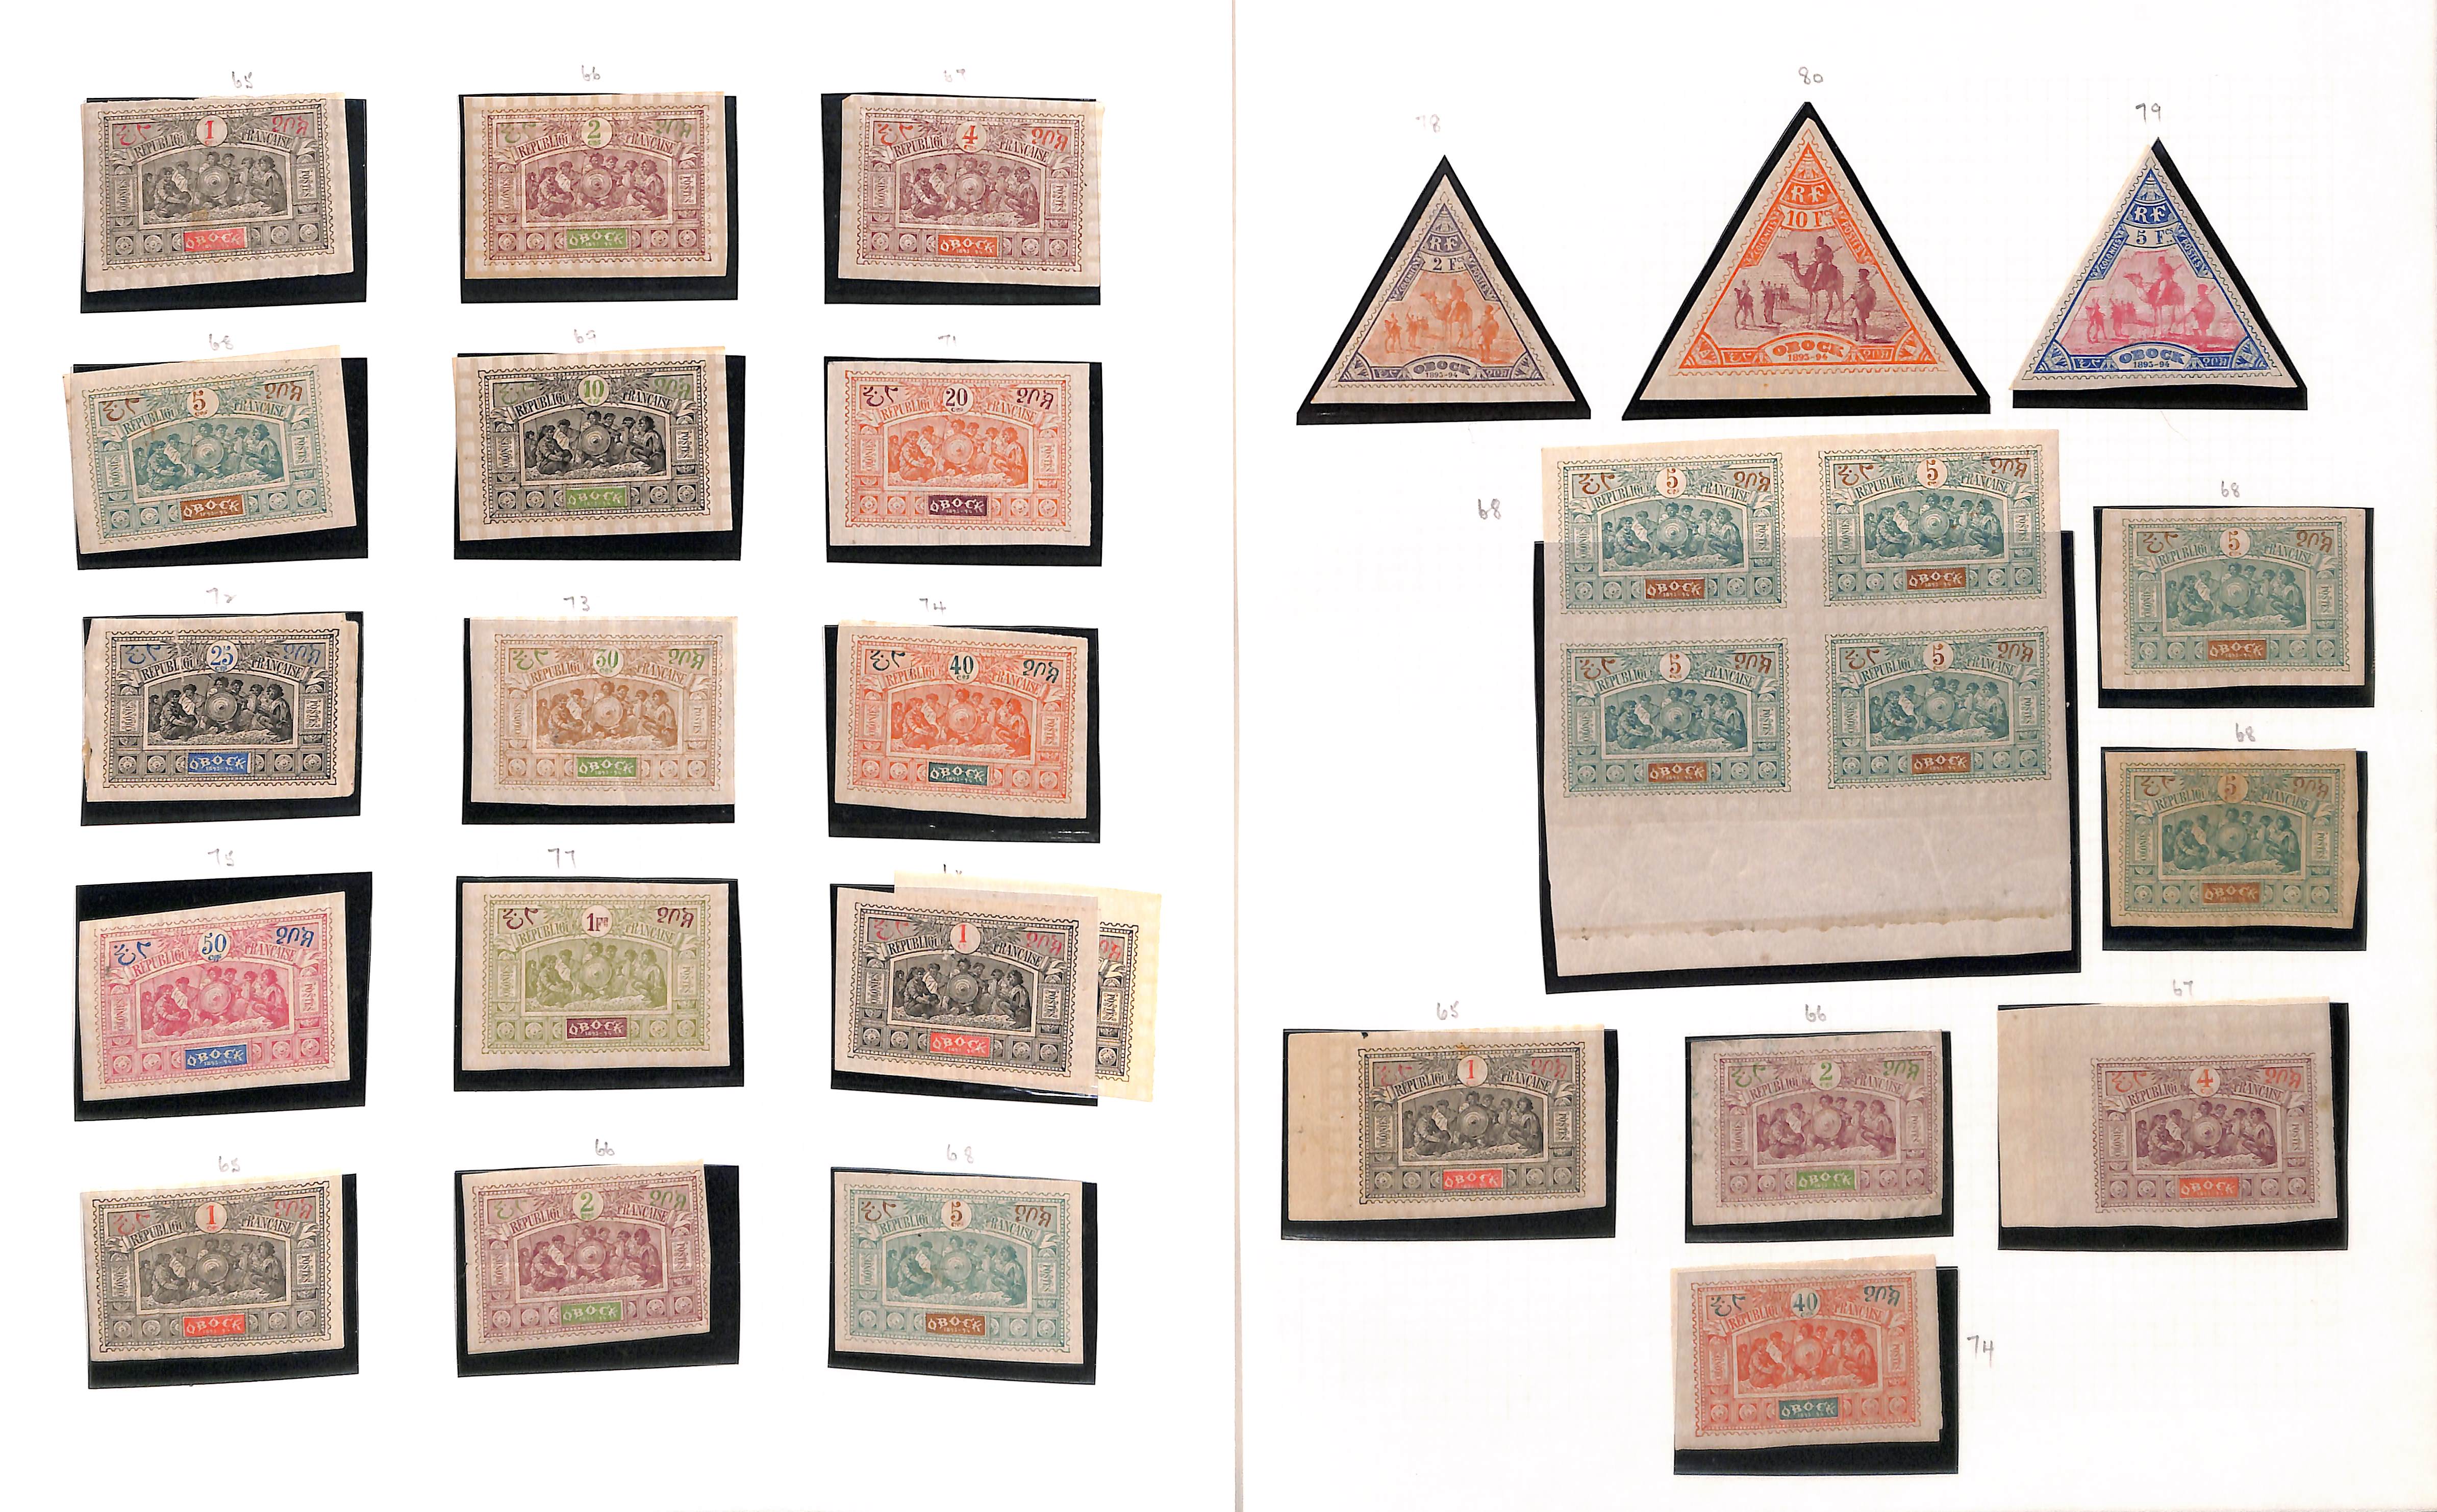 Obock. 1892-1903 Mint and used collection including 1892 first set mint or used and second set - Image 5 of 7